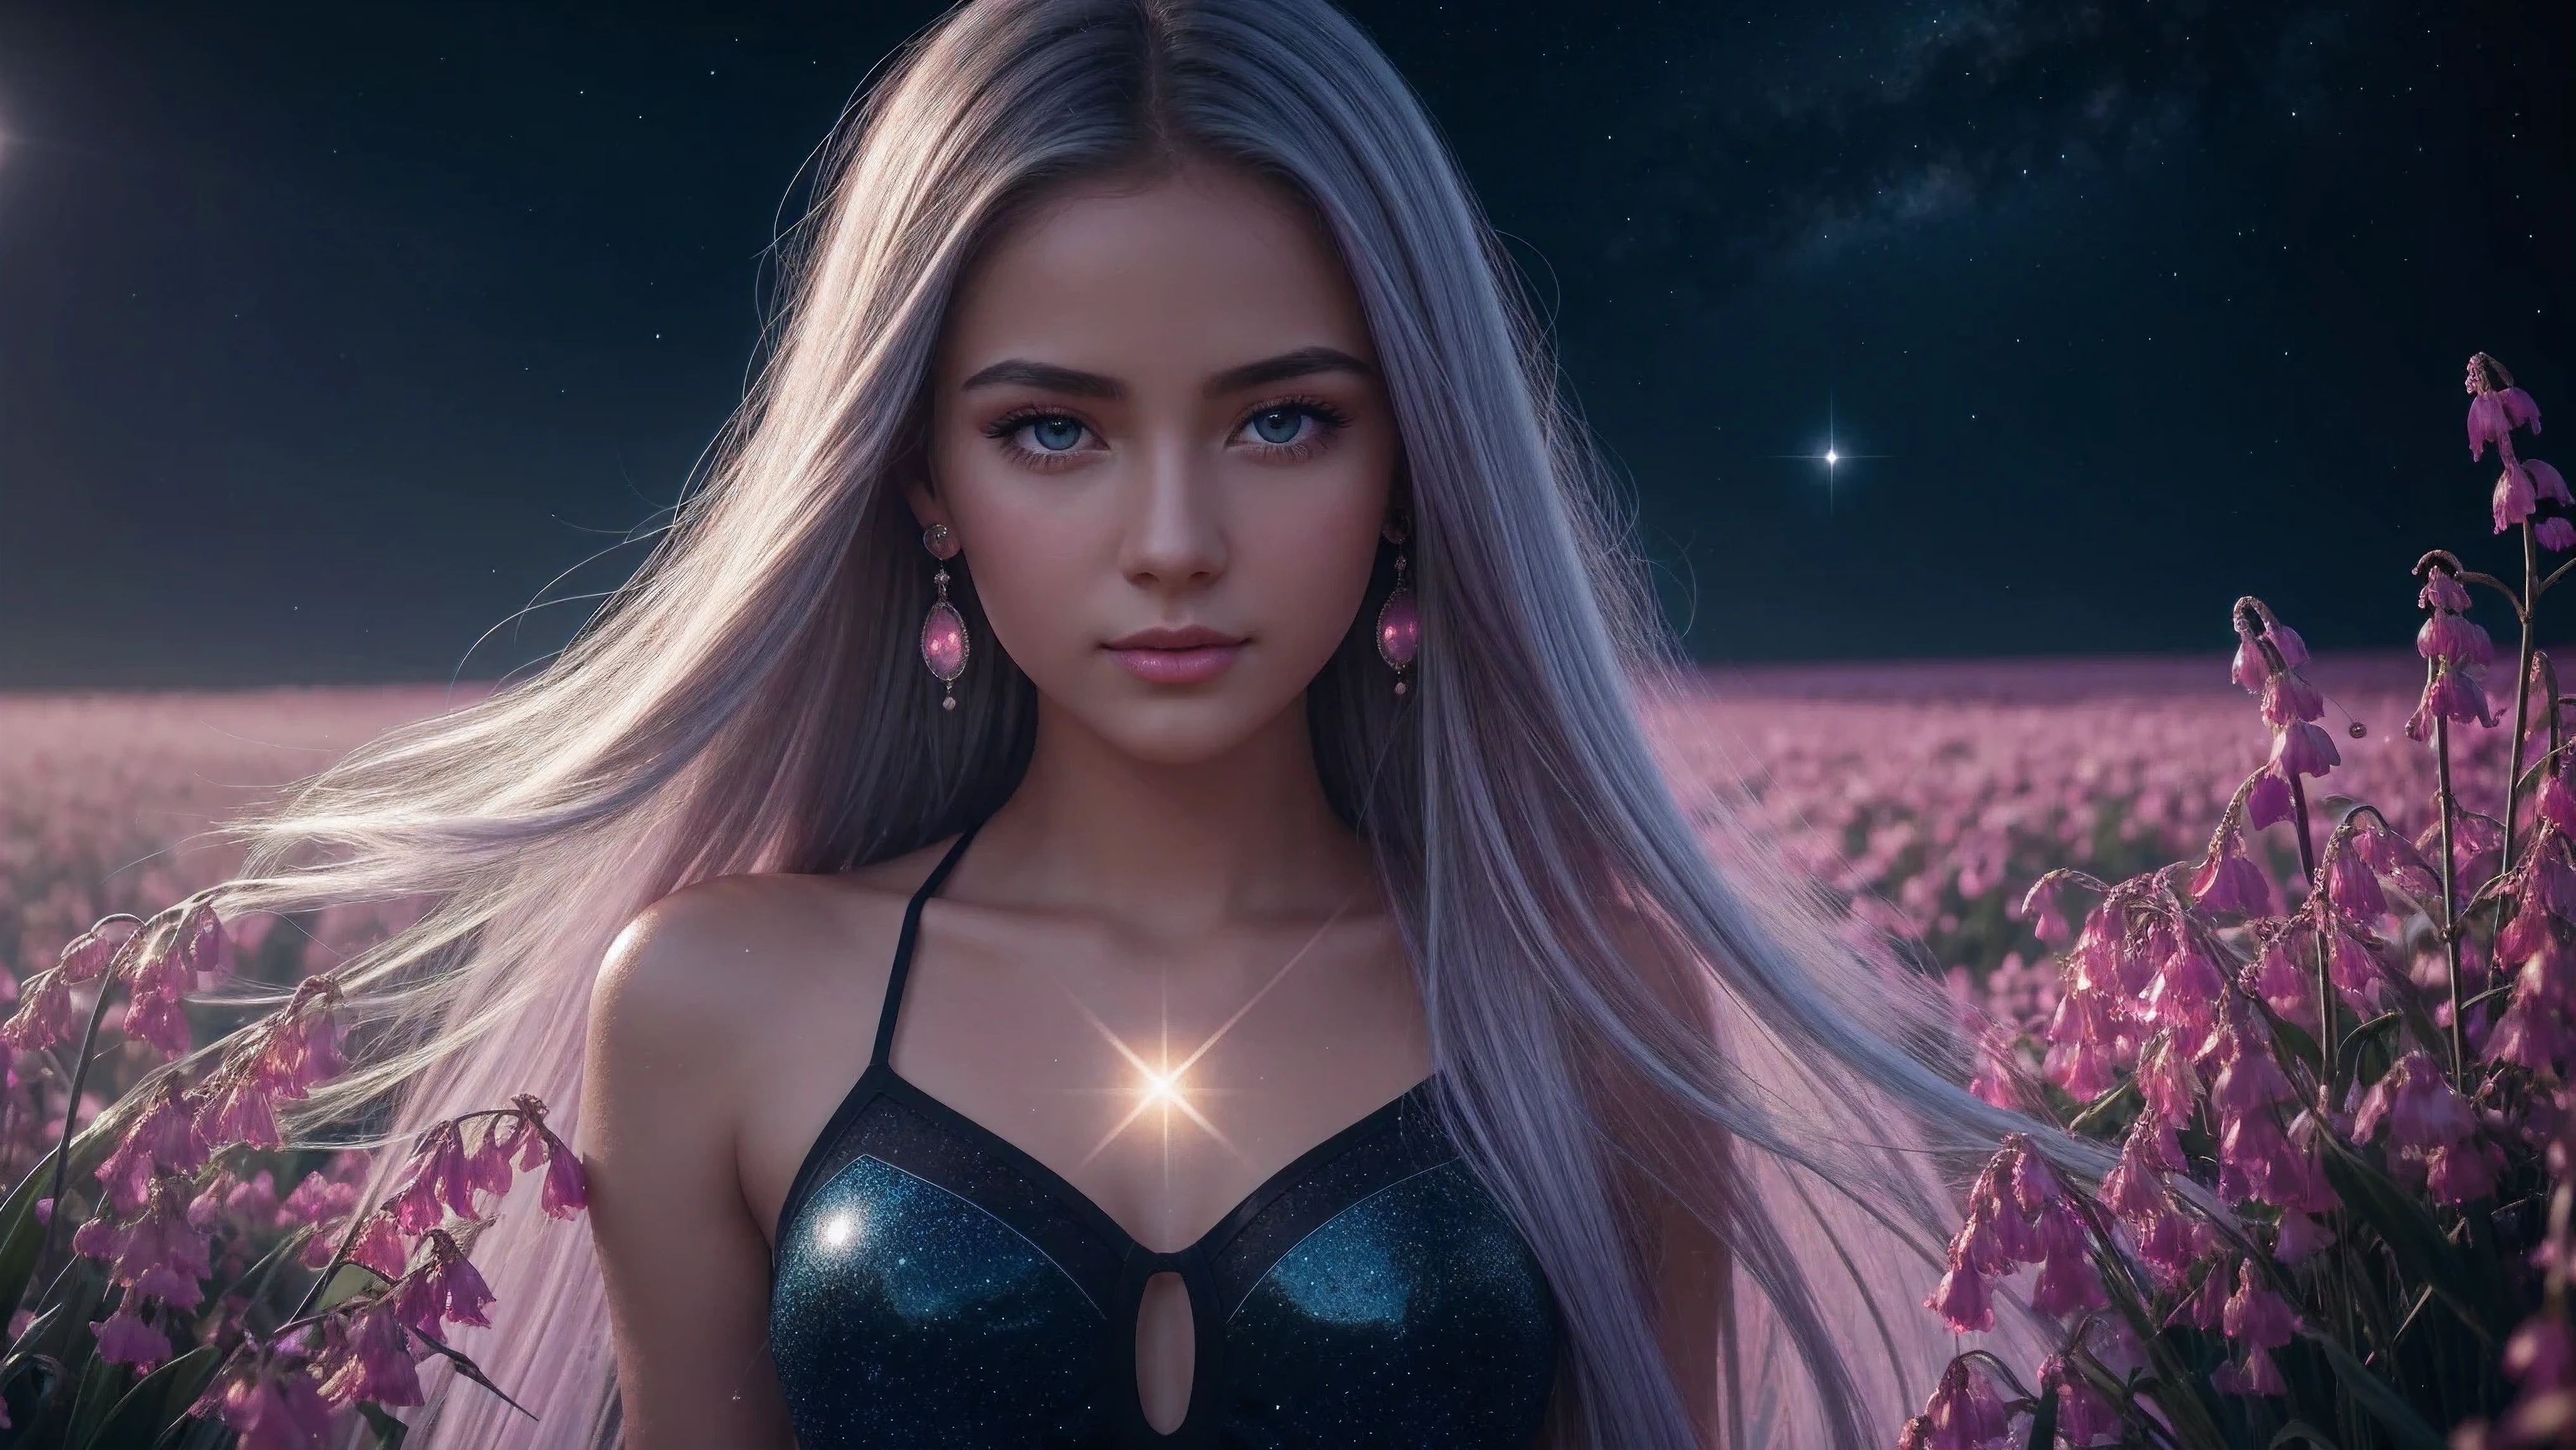 close-upBeautiful realistic girl with blue long hair in the fog,deep atmosphere ,Close-up of clean skin with detailed skin ,,in black tights and a pink blouse ,on an orange background ,Against the background of the starry sky,Bright makeup,EARRINGS WITH GLITTERS,two-leaf gray flower,translucent speckled bifoliate gray,Bioluminescent - Ultra High Quality 8K Music Equalizer, high passion, Rich colors, Soft light, Super detailed photos. ultra high quality 8K, high passion, Noise reduction, яркие Rich colors.. high quality, 8k Ultra HD, high passionhigh quality,мягкие close focus,very beautiful flower, translucent red lily of the valley with dew drop flower, bioluminescent flower glows and shimmers, he grows in a mysterious forest, shrouded in mystery, Сверхhigh quality 8k, high contrast t, Rich colors, Soft light, Ultra-detailed photos. Сверхhigh quality 8k, tall with the spotlight on a girl in a black and red dress.., High detail, realistic beautiful girl with long light yellow hair, Gradient ,girl with good charisma, creative approach to non-standard poses,., Girl in miniskirt, there are splashes of silver dust, and behind him nebula, atmospheric lighting, surrounded by wet dew drops, behind the fantasy world, on a beautiful background, glare, shine, shine, spray drops, high quality, 8k Ultra HD, high contrast, high quality, Soft light, Close-up of a beautiful realistic girl with BRIGHT WHITE TURQUOISE and pink long hair......... ,Close-up of clean skin with detailed skin ,full length, in a short miniskirt, Preparation Realistic room with silver patterns with pearlescent shine,in drops of dew, stands in a beautiful place where there are a lot of rubber hearts ,everything around is pink and blue,grow along the edges with flowers,in the moonlit meadow ,nebula,epic mood,Best quality,ultra detail,Contrast,clear focus,volumetric light